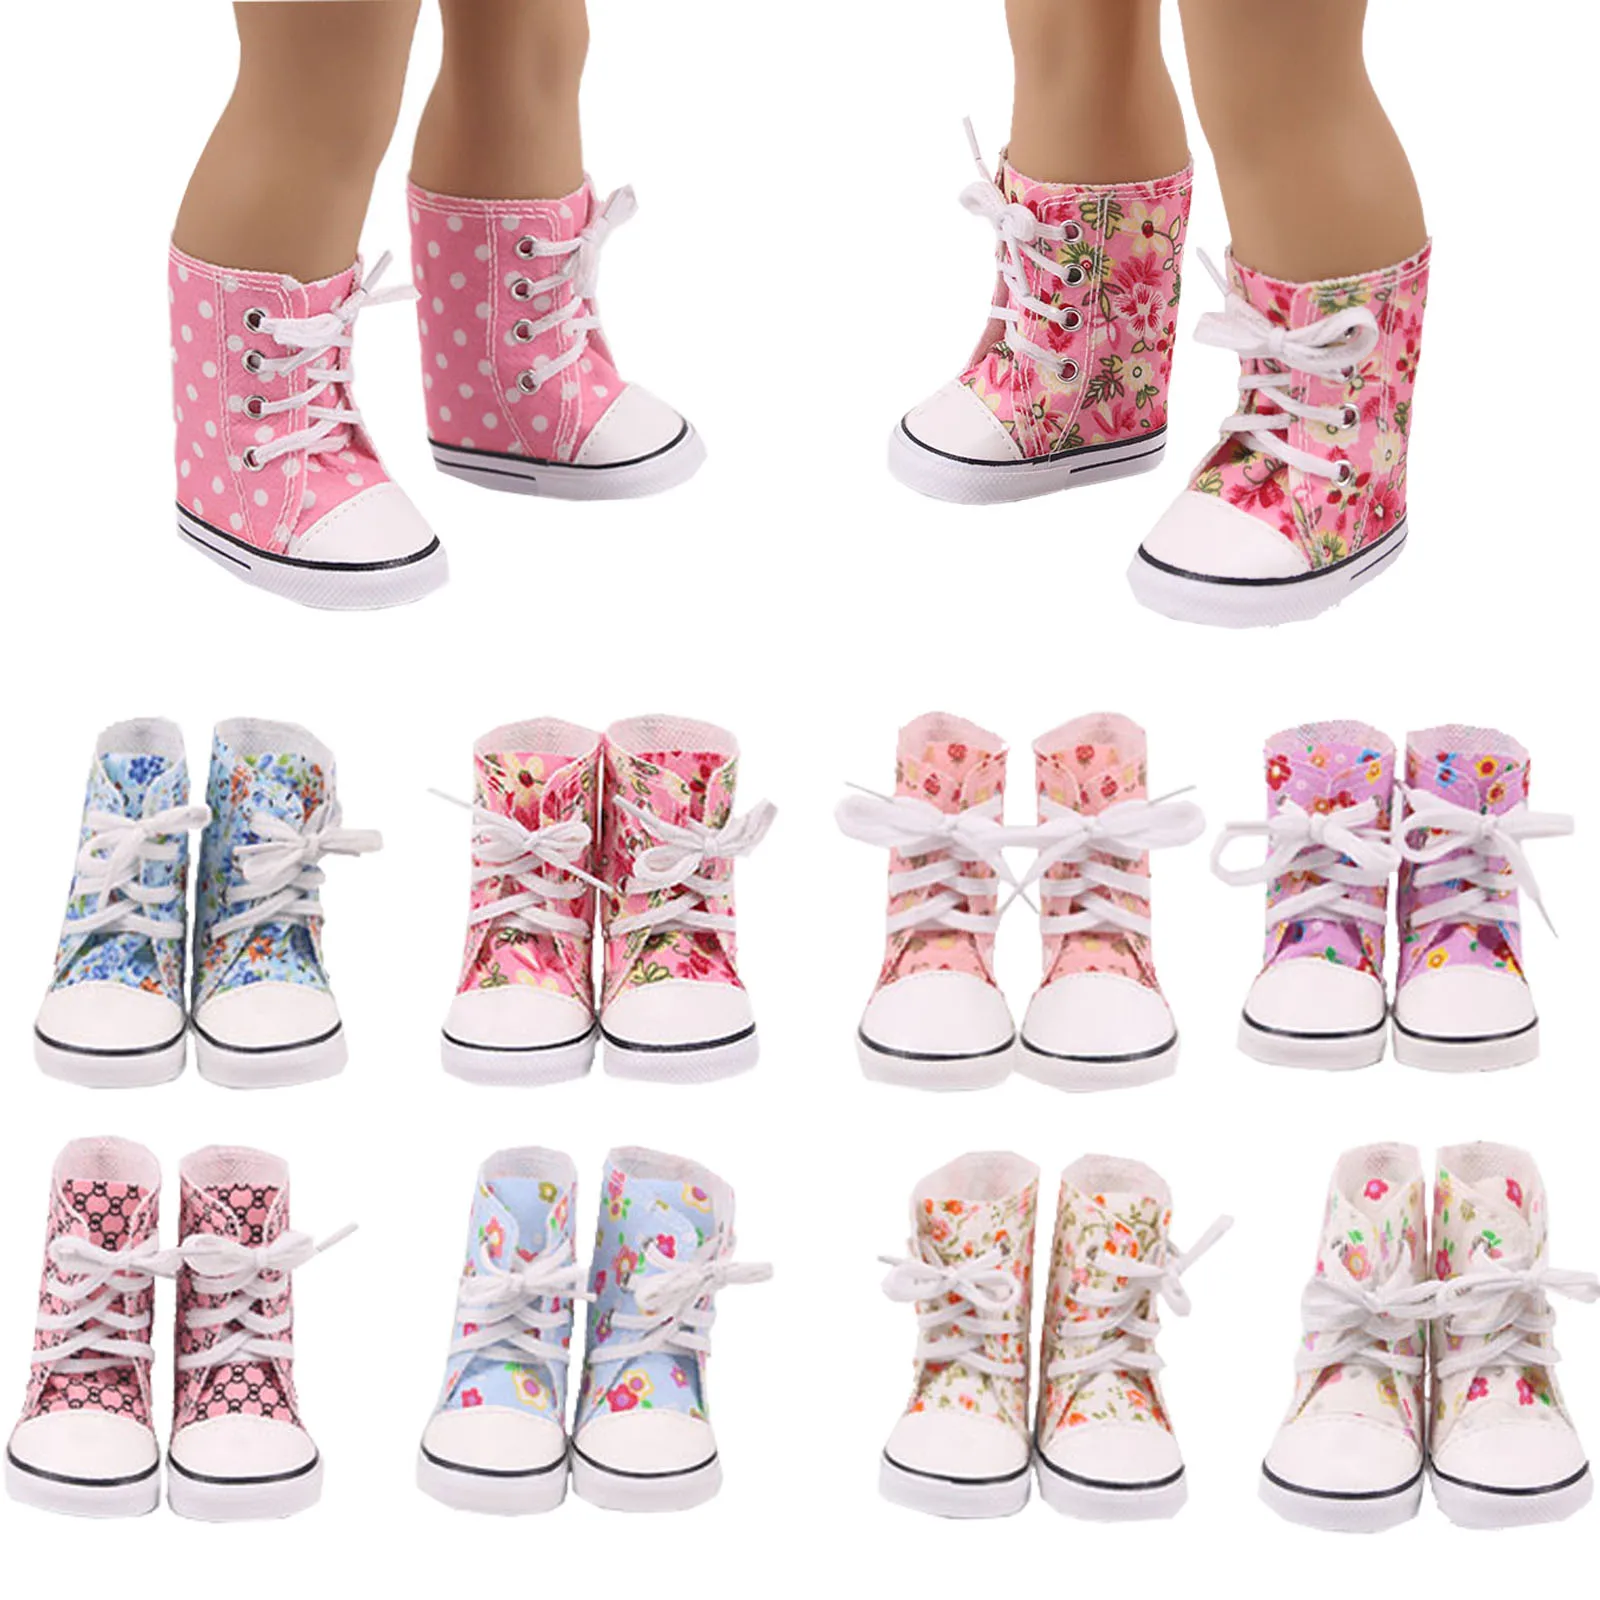 Doll Shoes  Long Print Boots For 18 Inch &Bald Head Doll &New Born Baby Generation Birthday Girl's Toy Gifts